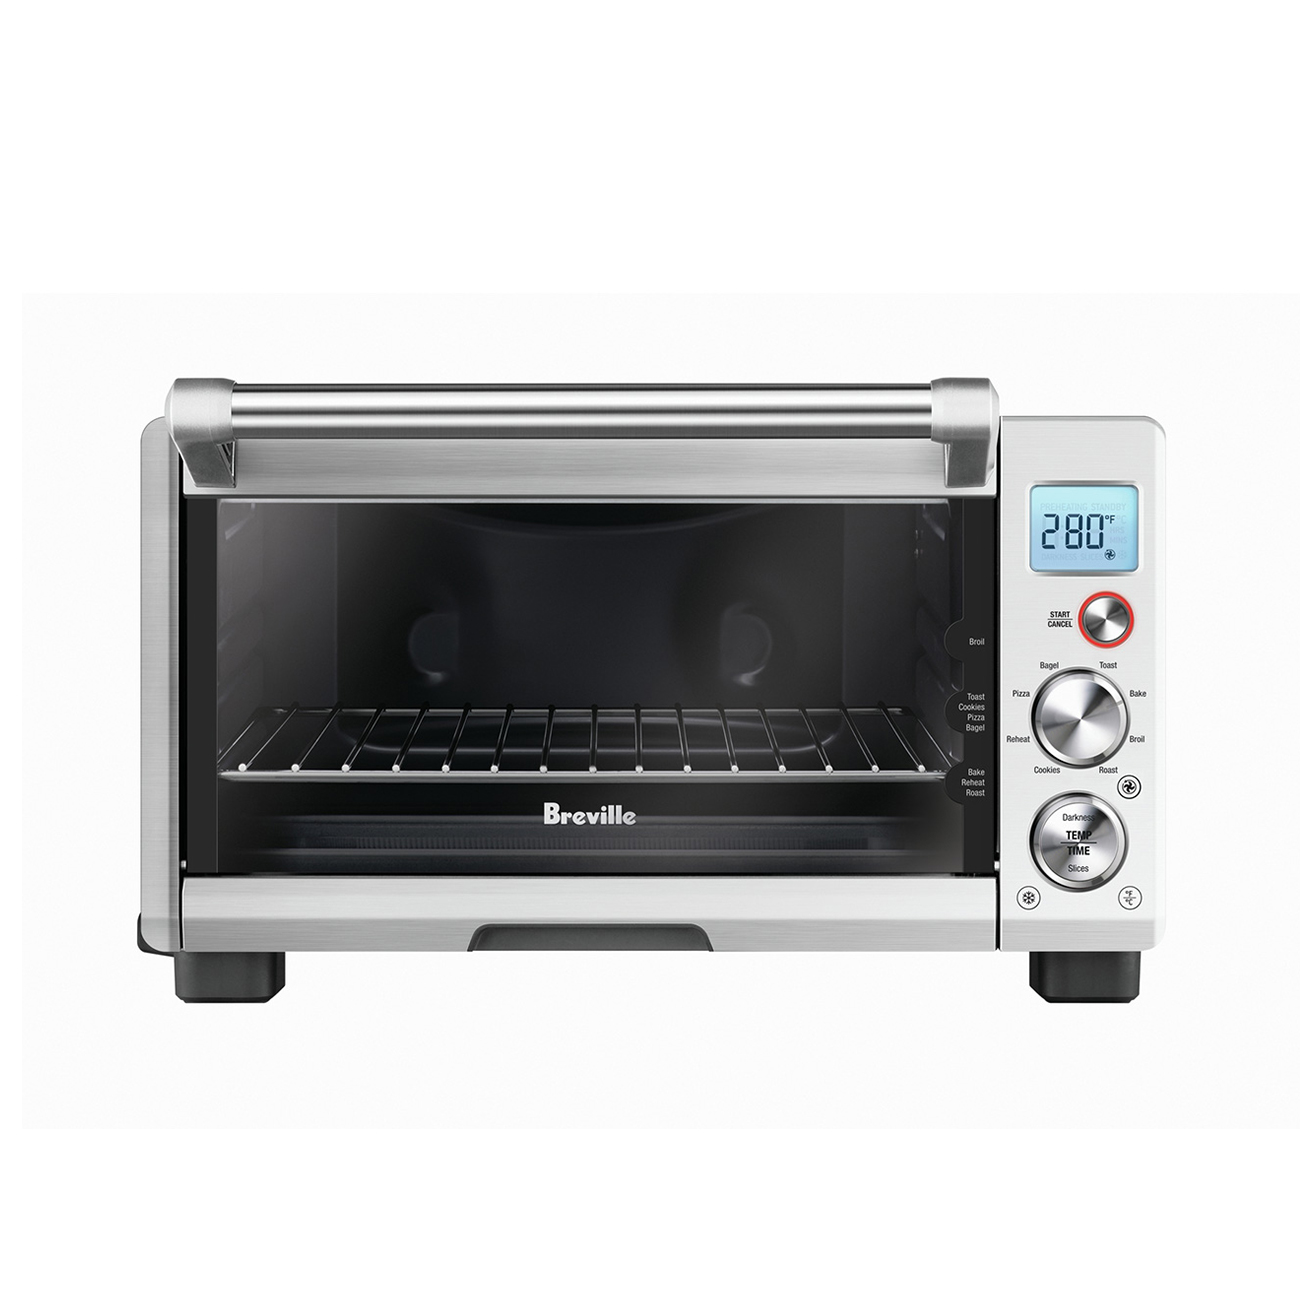 The Smart Oven Compact Convection Toaster Oven Breville